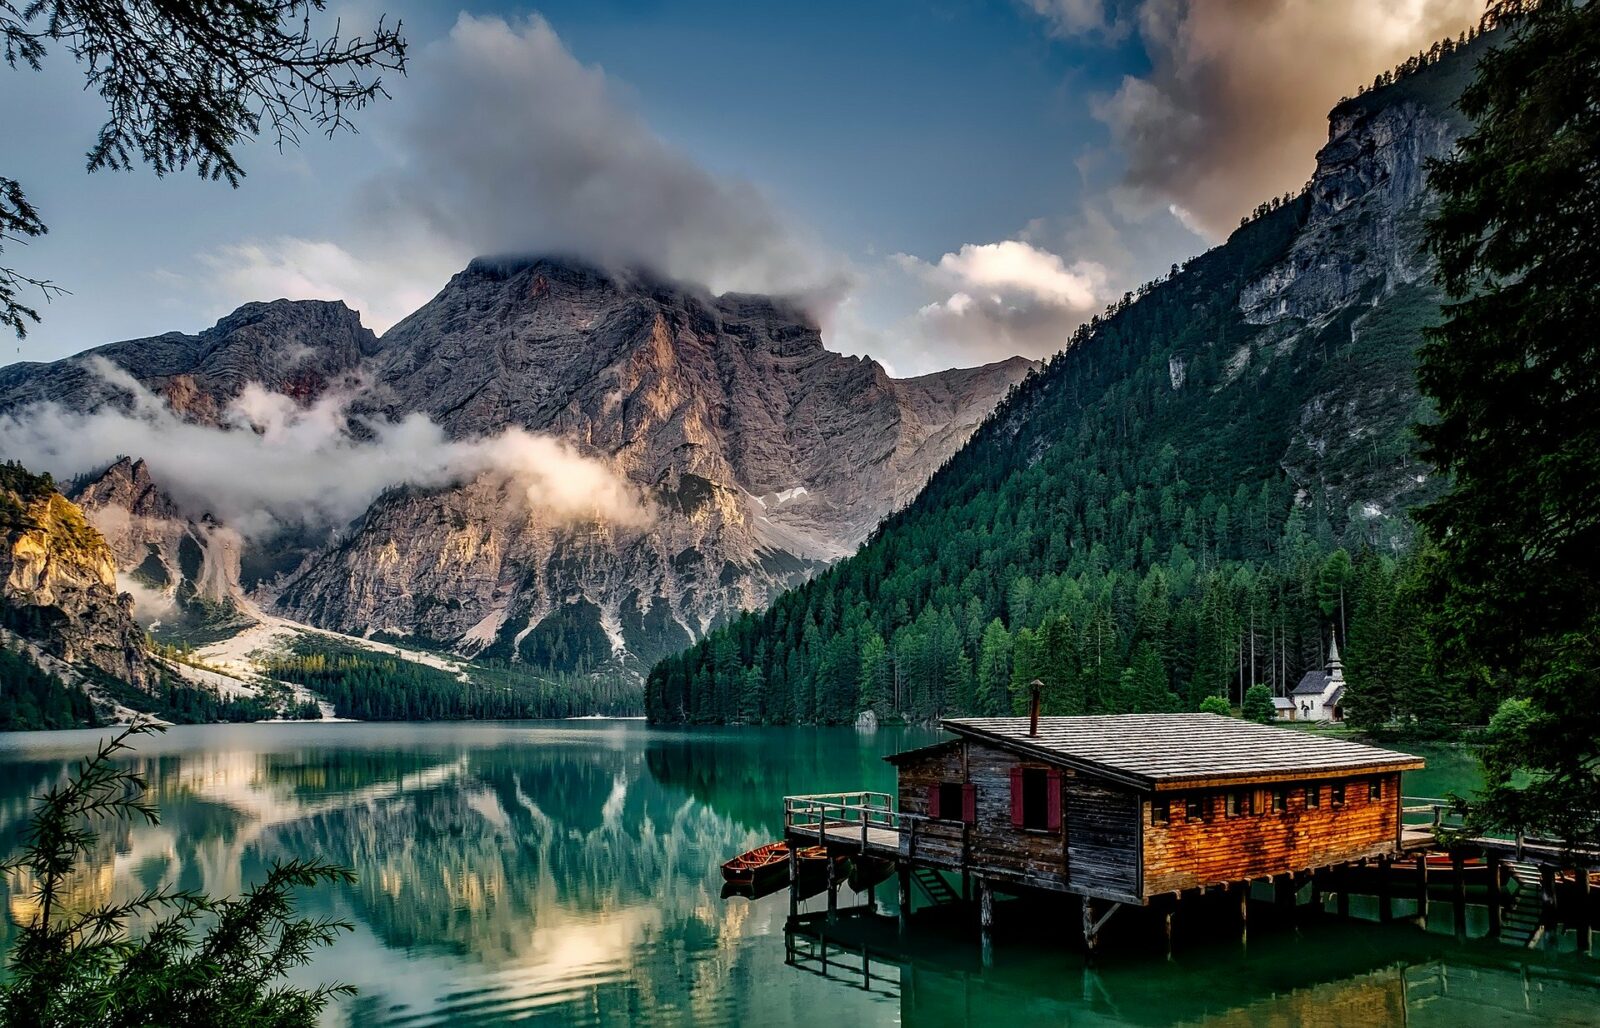 cabin on a lake in canada with mountains and pines in the background